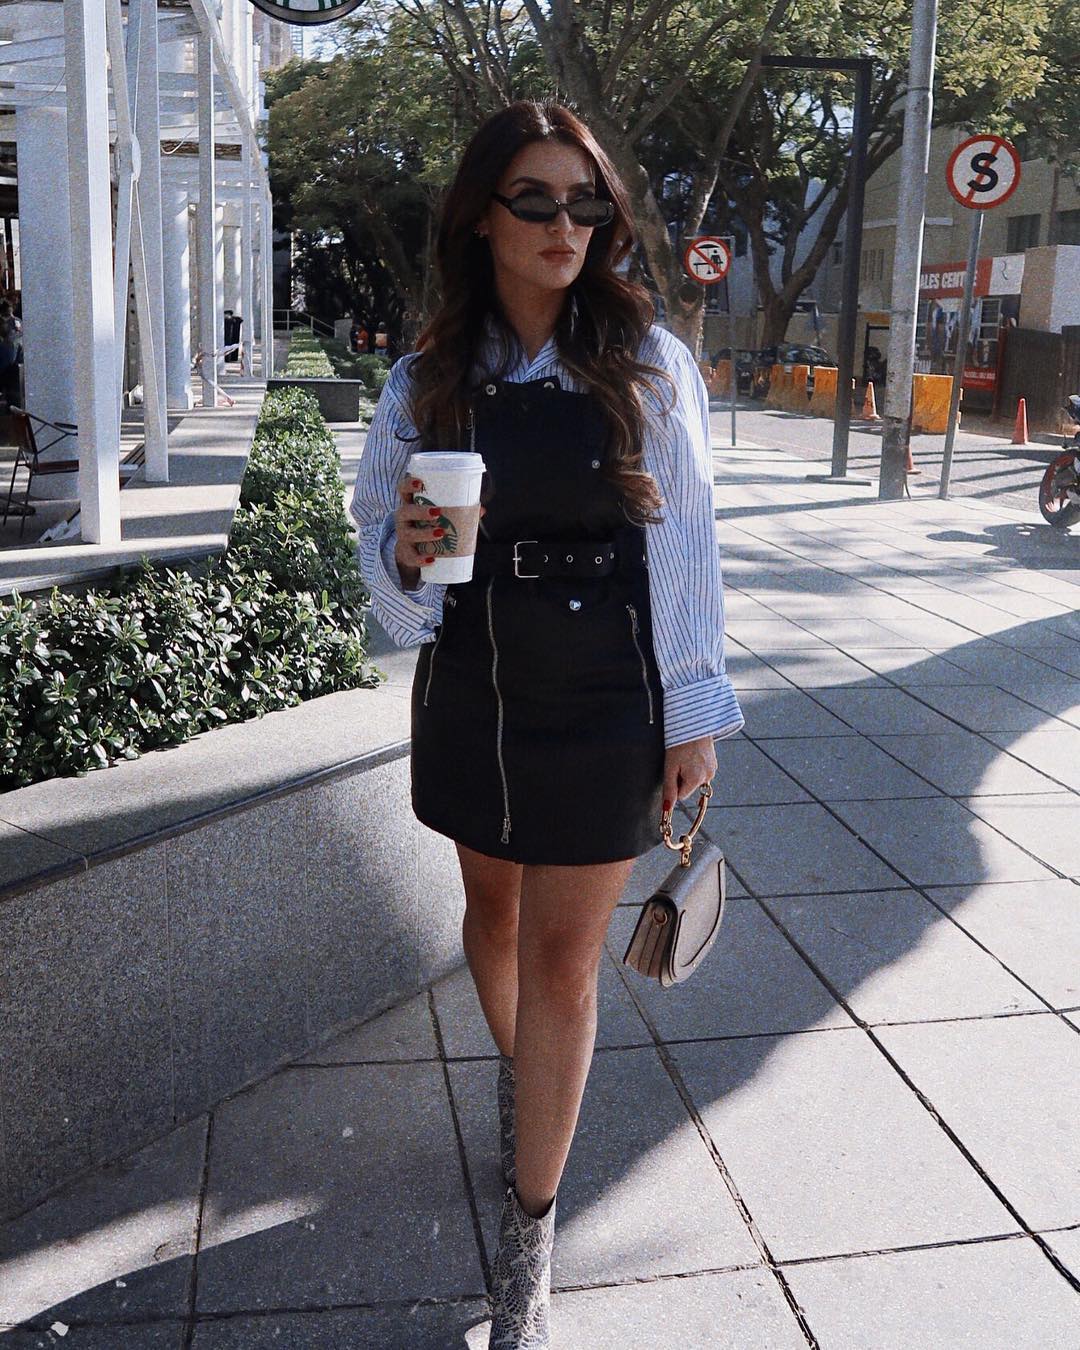 Black Biker Style Dress With Zip
Detailing And Oversized Striped White Shirt Outfit